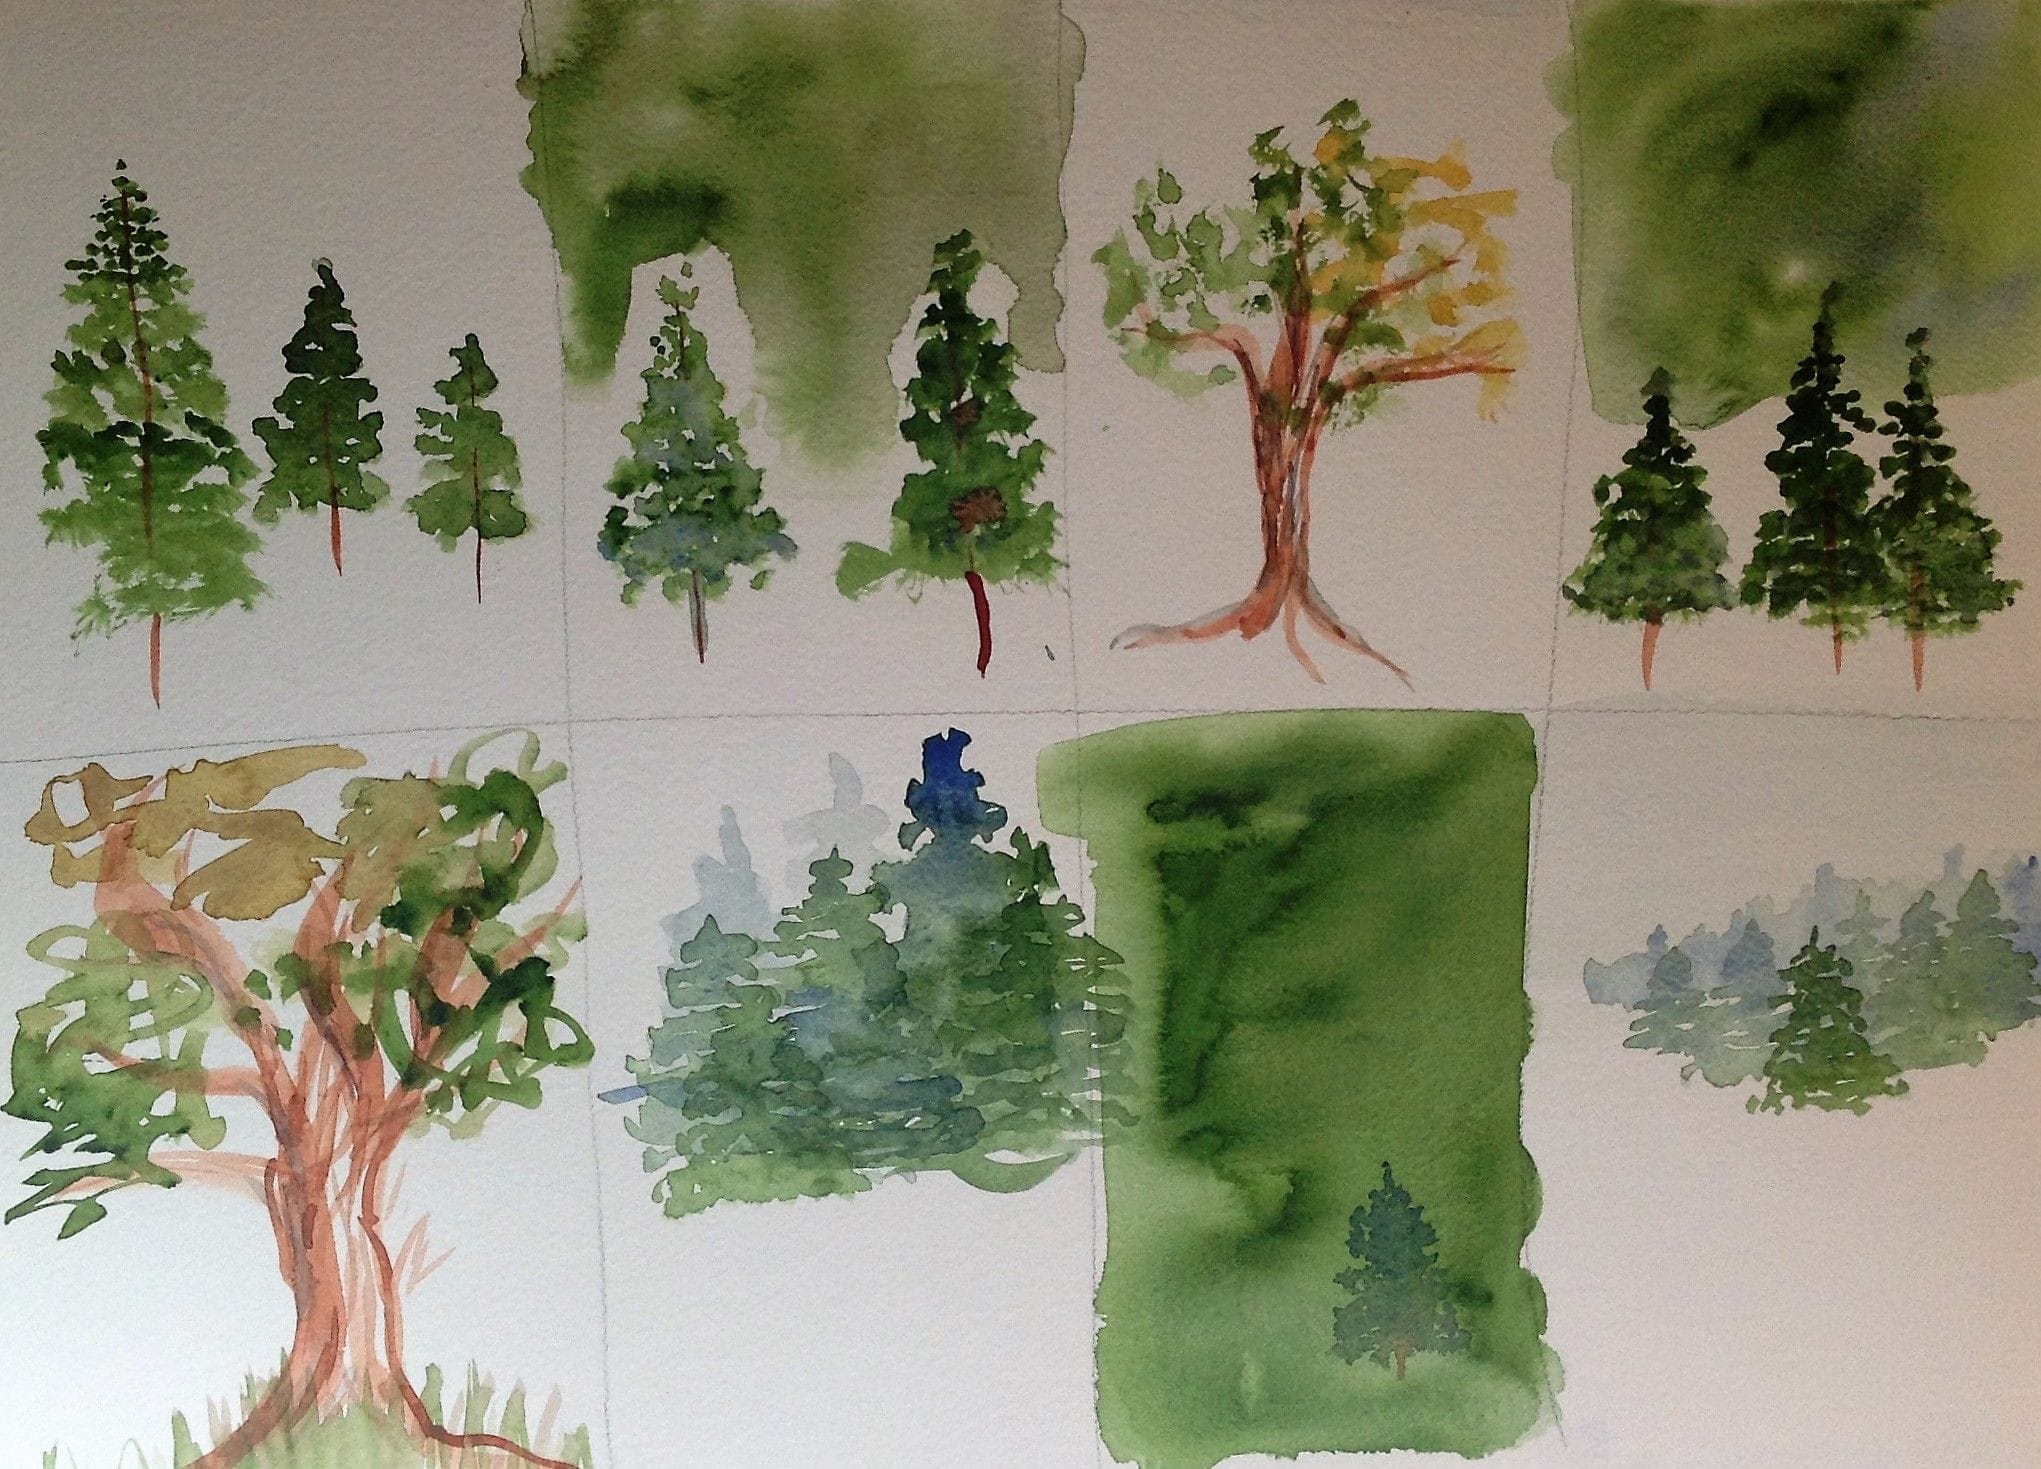 Exercise With Trees #2, 2003
Watercolor on Paper
15"W x 11"H, Walli White, artist